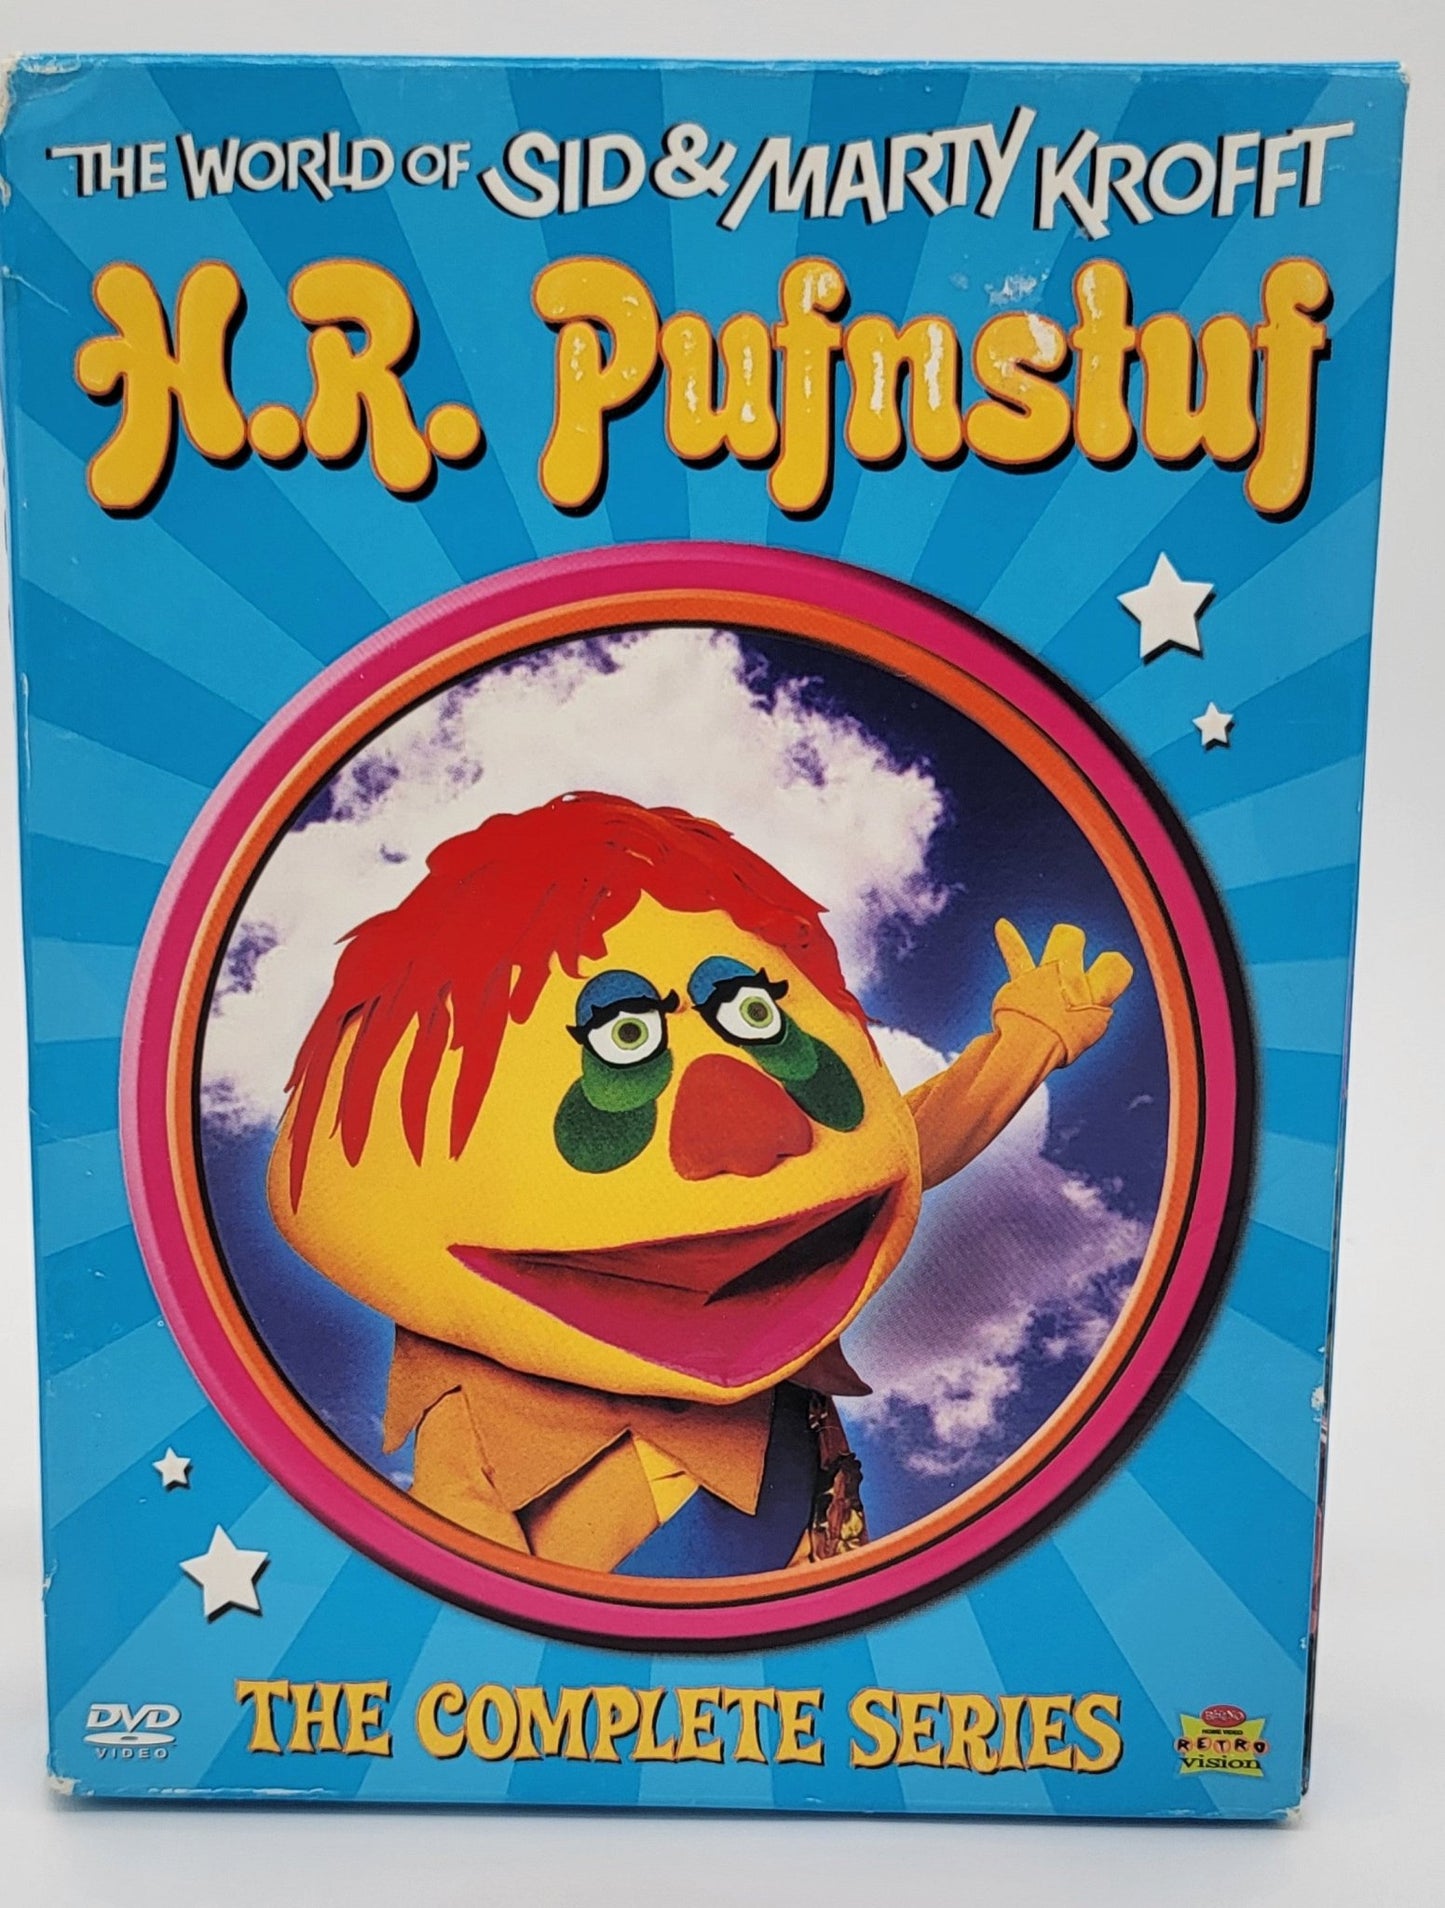 Rhino Theatrical - H.R. Pufnstuf | The Complete Series | DVD - DVD - Steady Bunny Shop